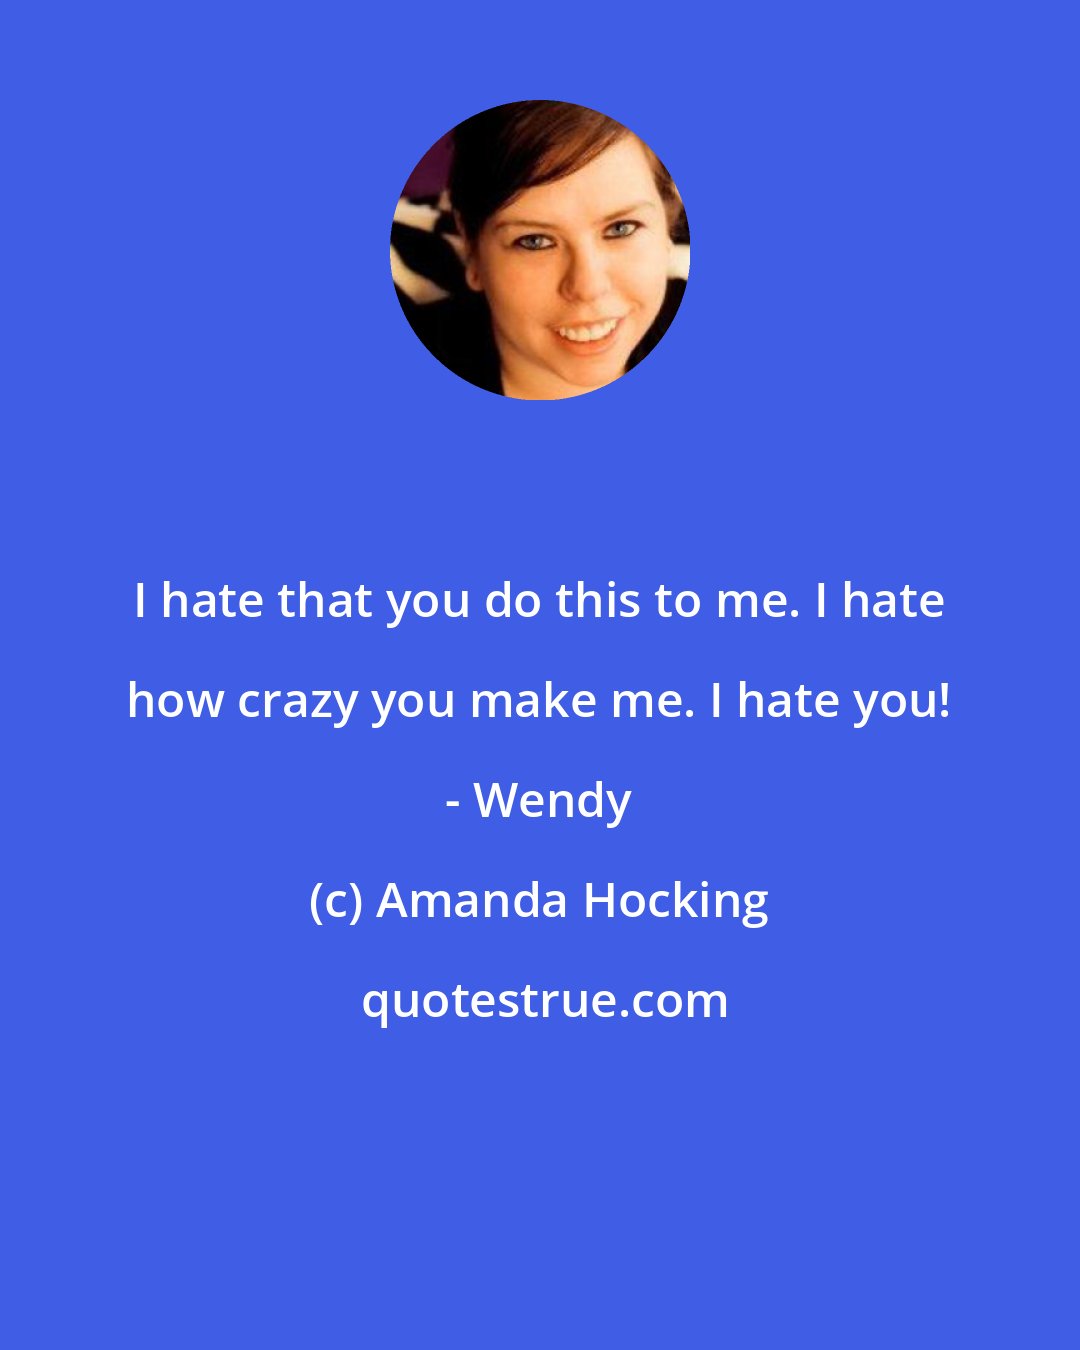 Amanda Hocking: I hate that you do this to me. I hate how crazy you make me. I hate you! - Wendy